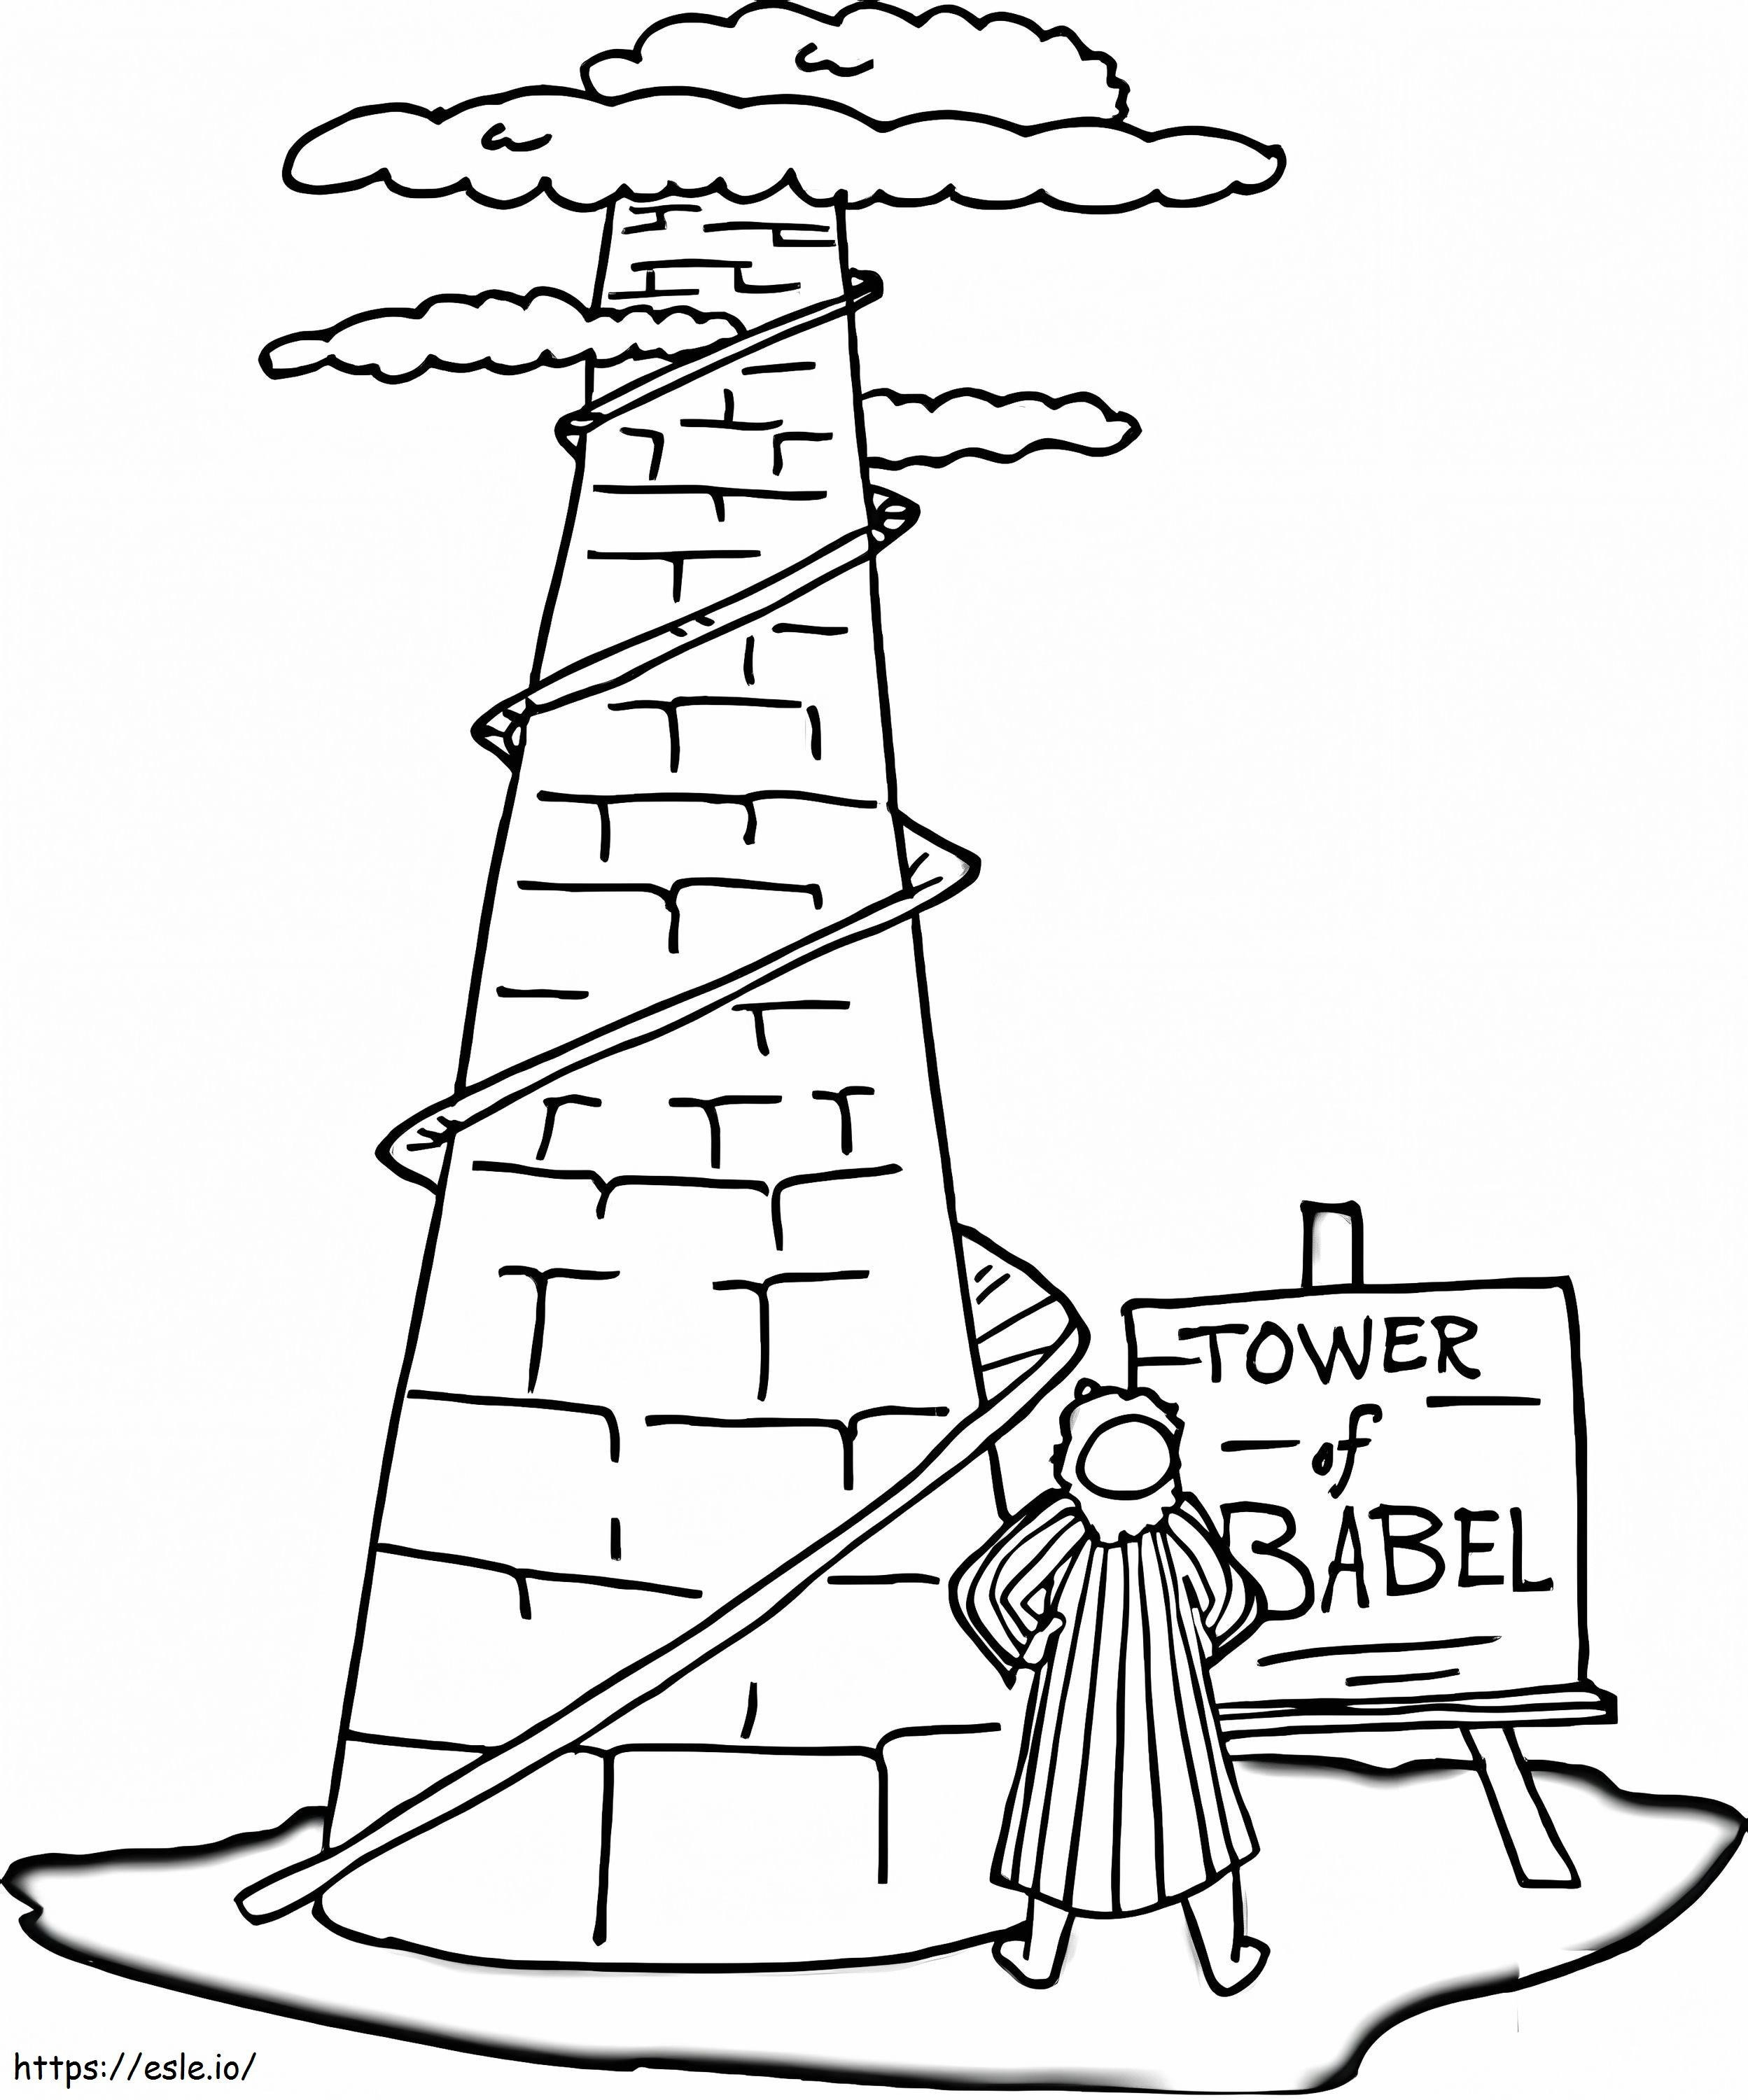 Tower Of Babel coloring page